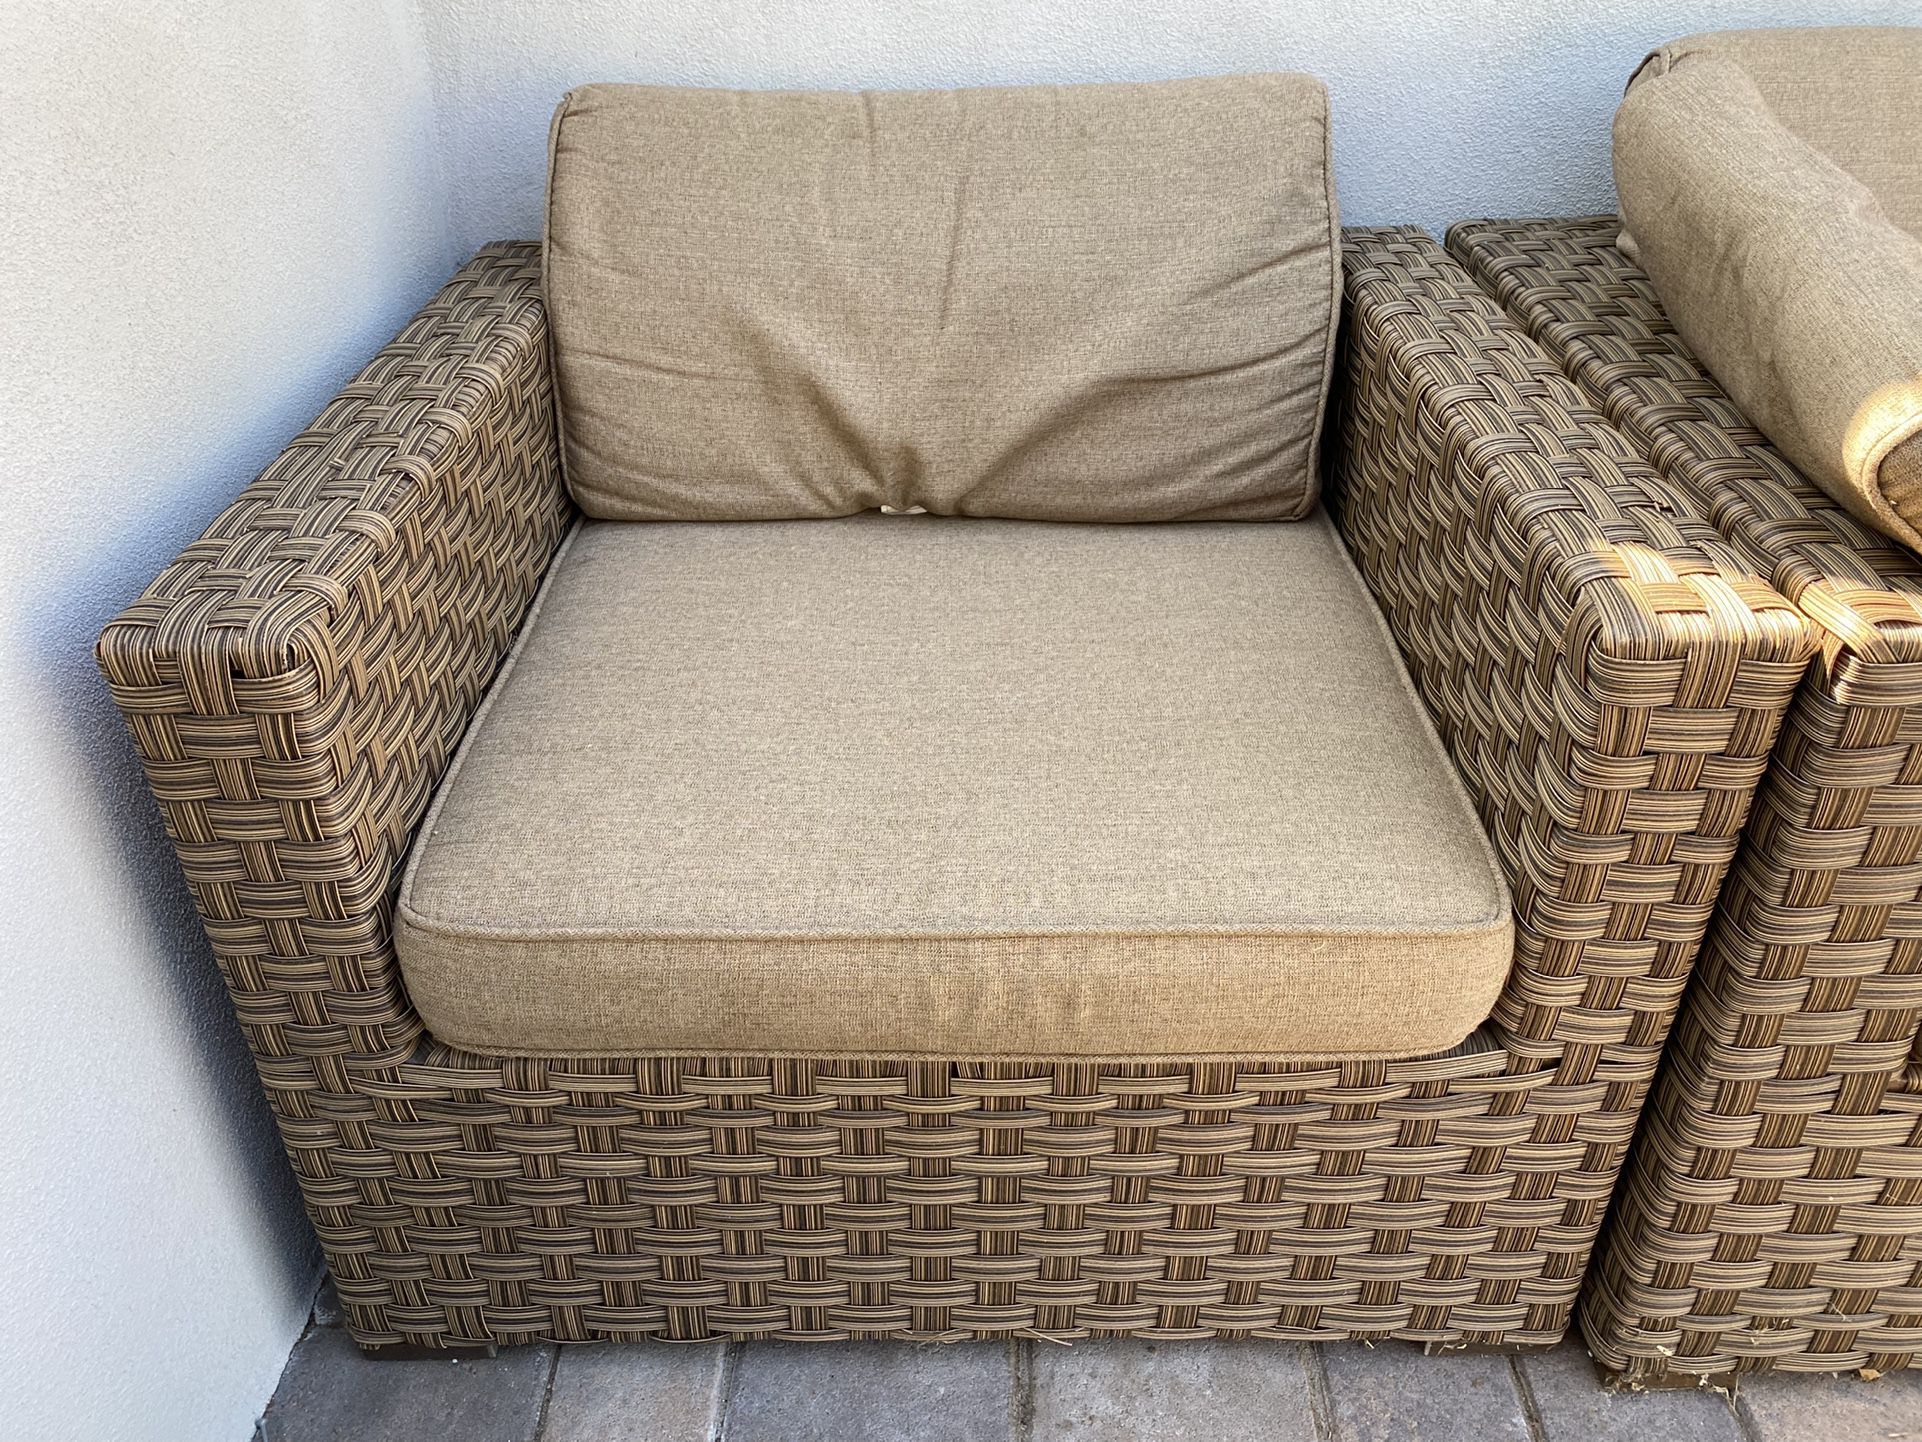 Outdoor Furniture For Sale